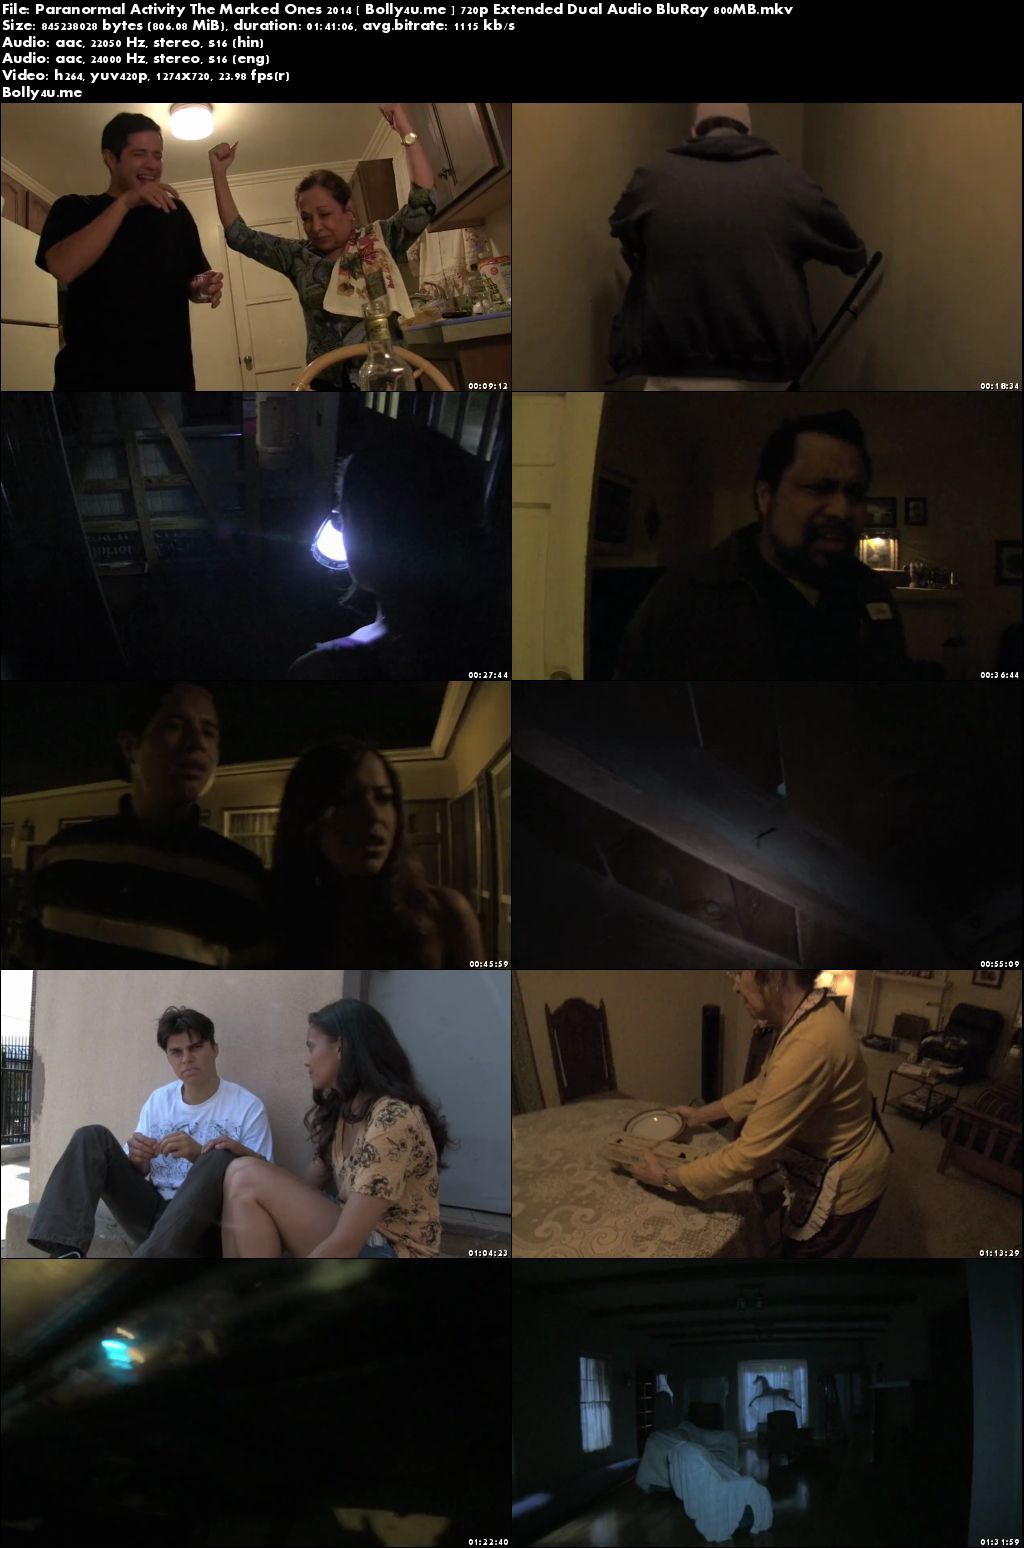 Paranormal Activity The Marked Ones 2014 BRRip 720p Hindi Dual Audio 800MB Download